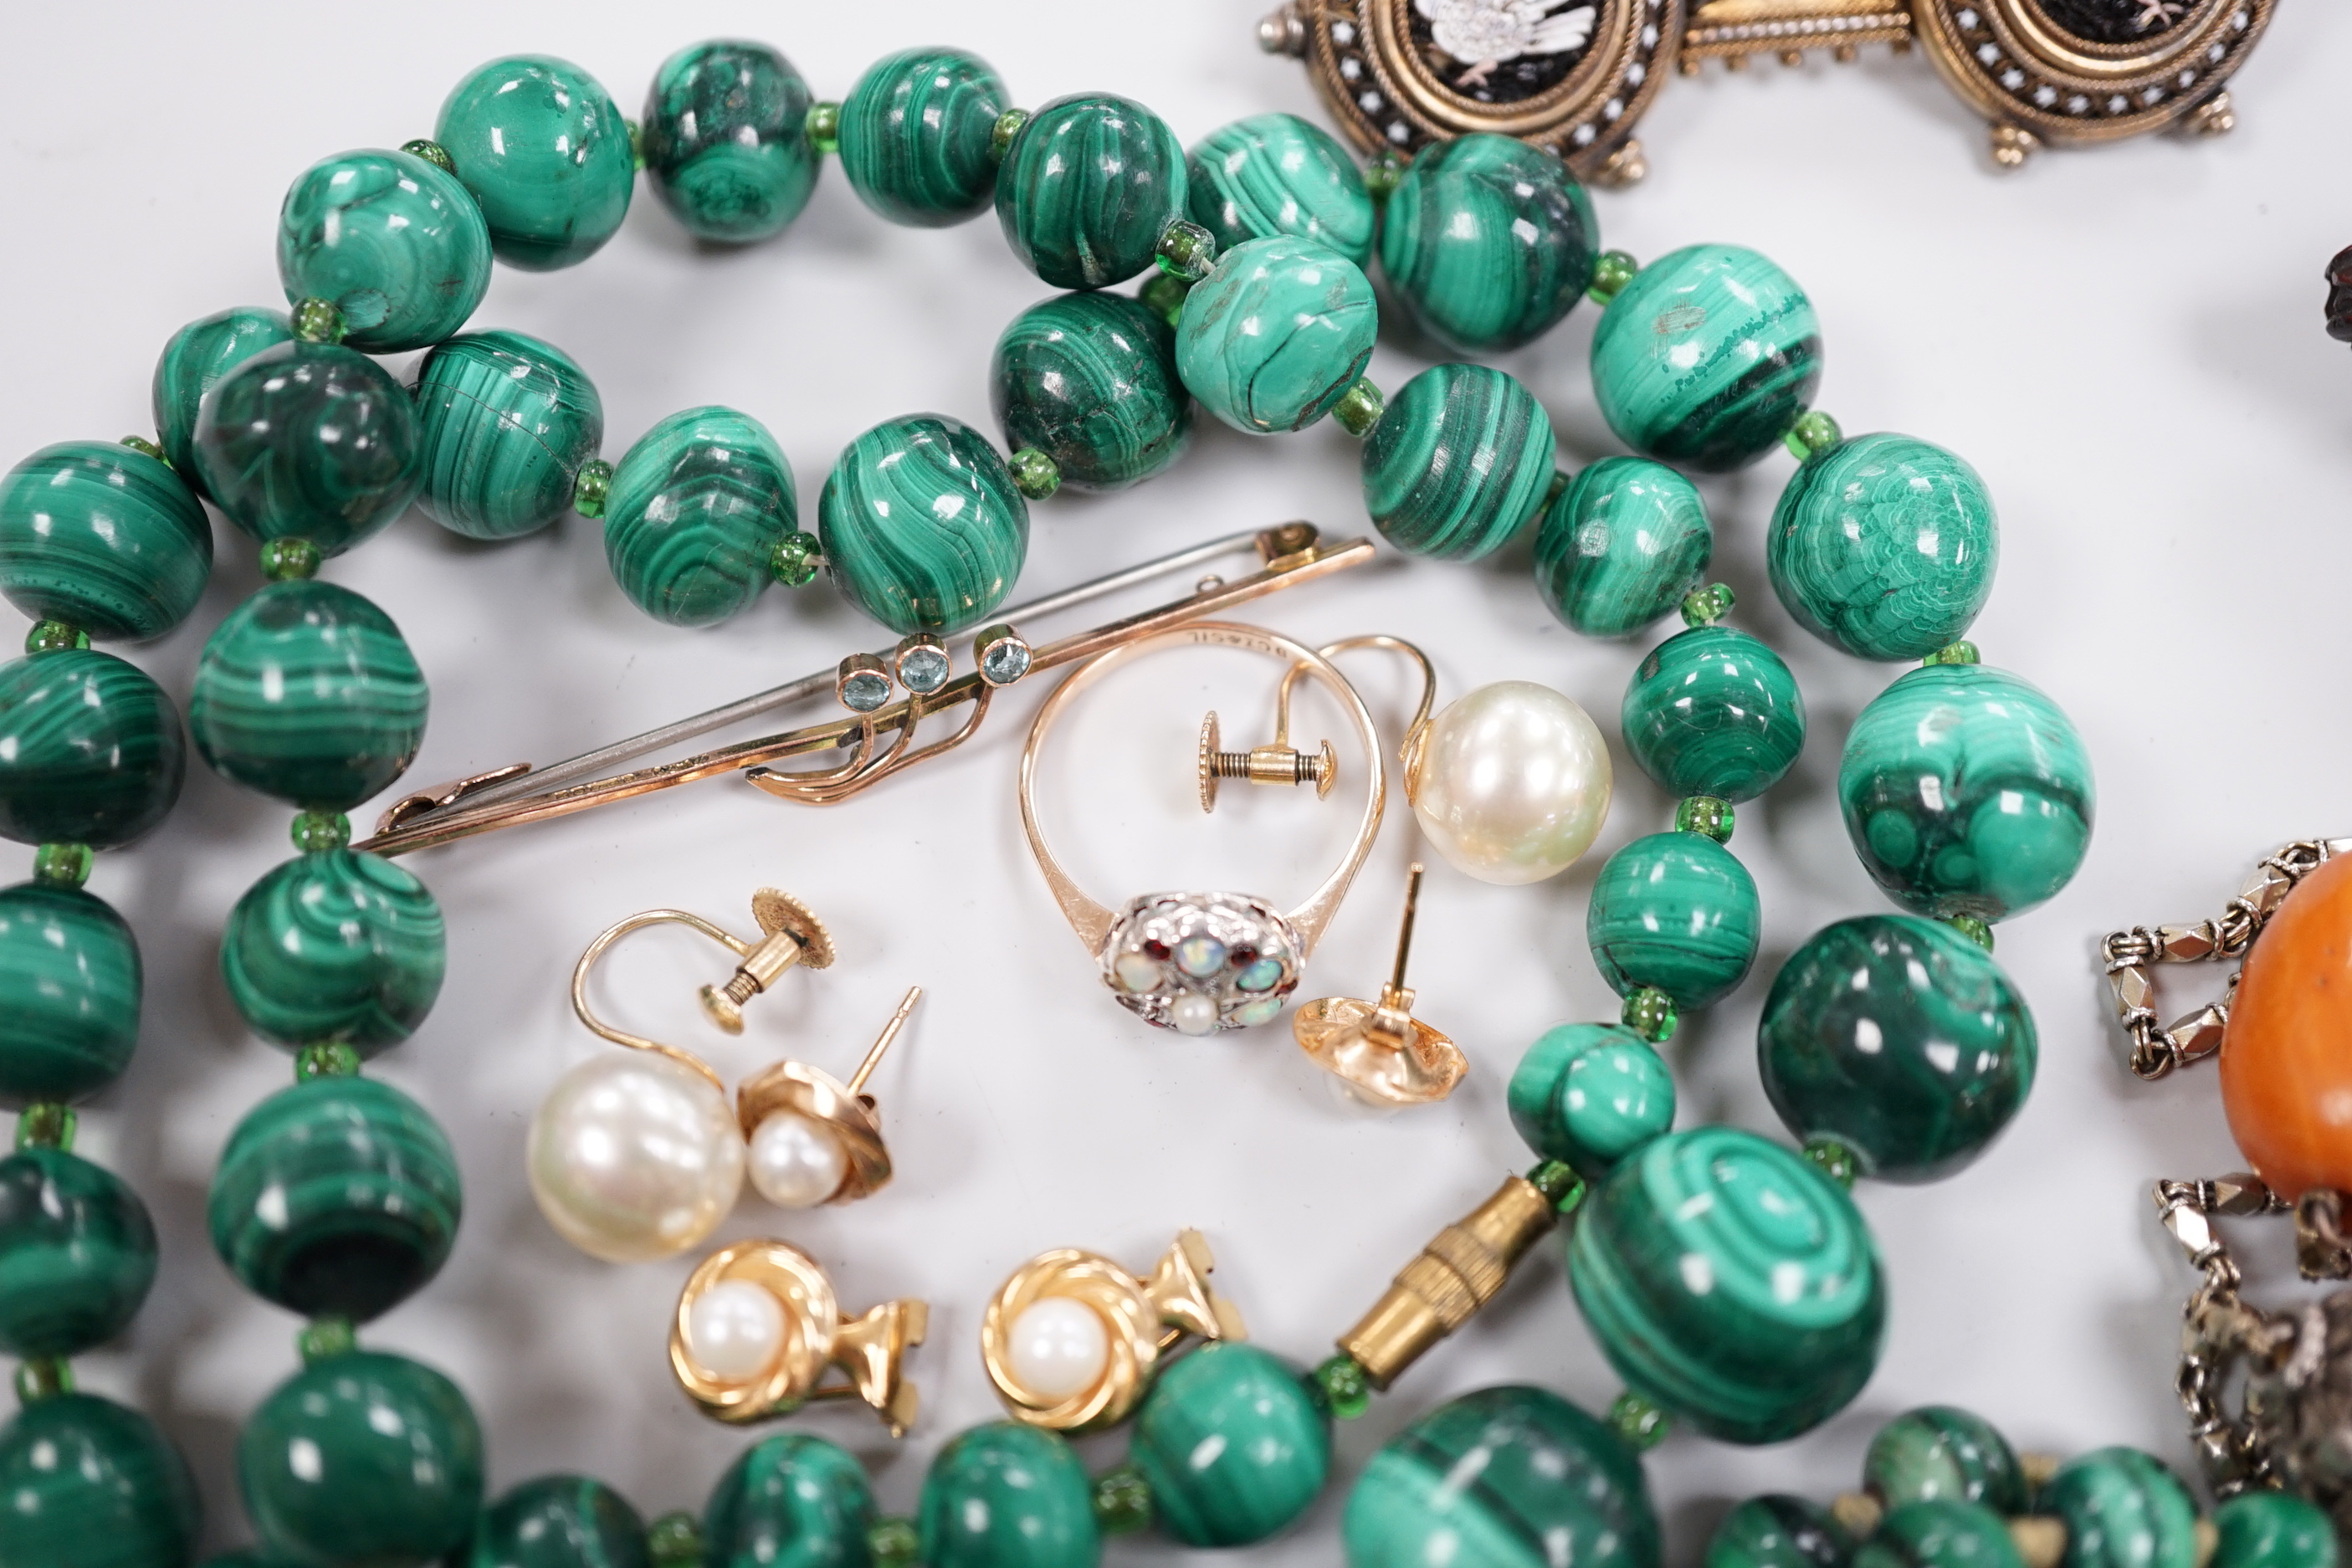 Assorted jewellery including a white metal and micro mosaic brooch, malachite necklace, 9ct and gem set bar brooch and ring, amber and white metal necklace etc.